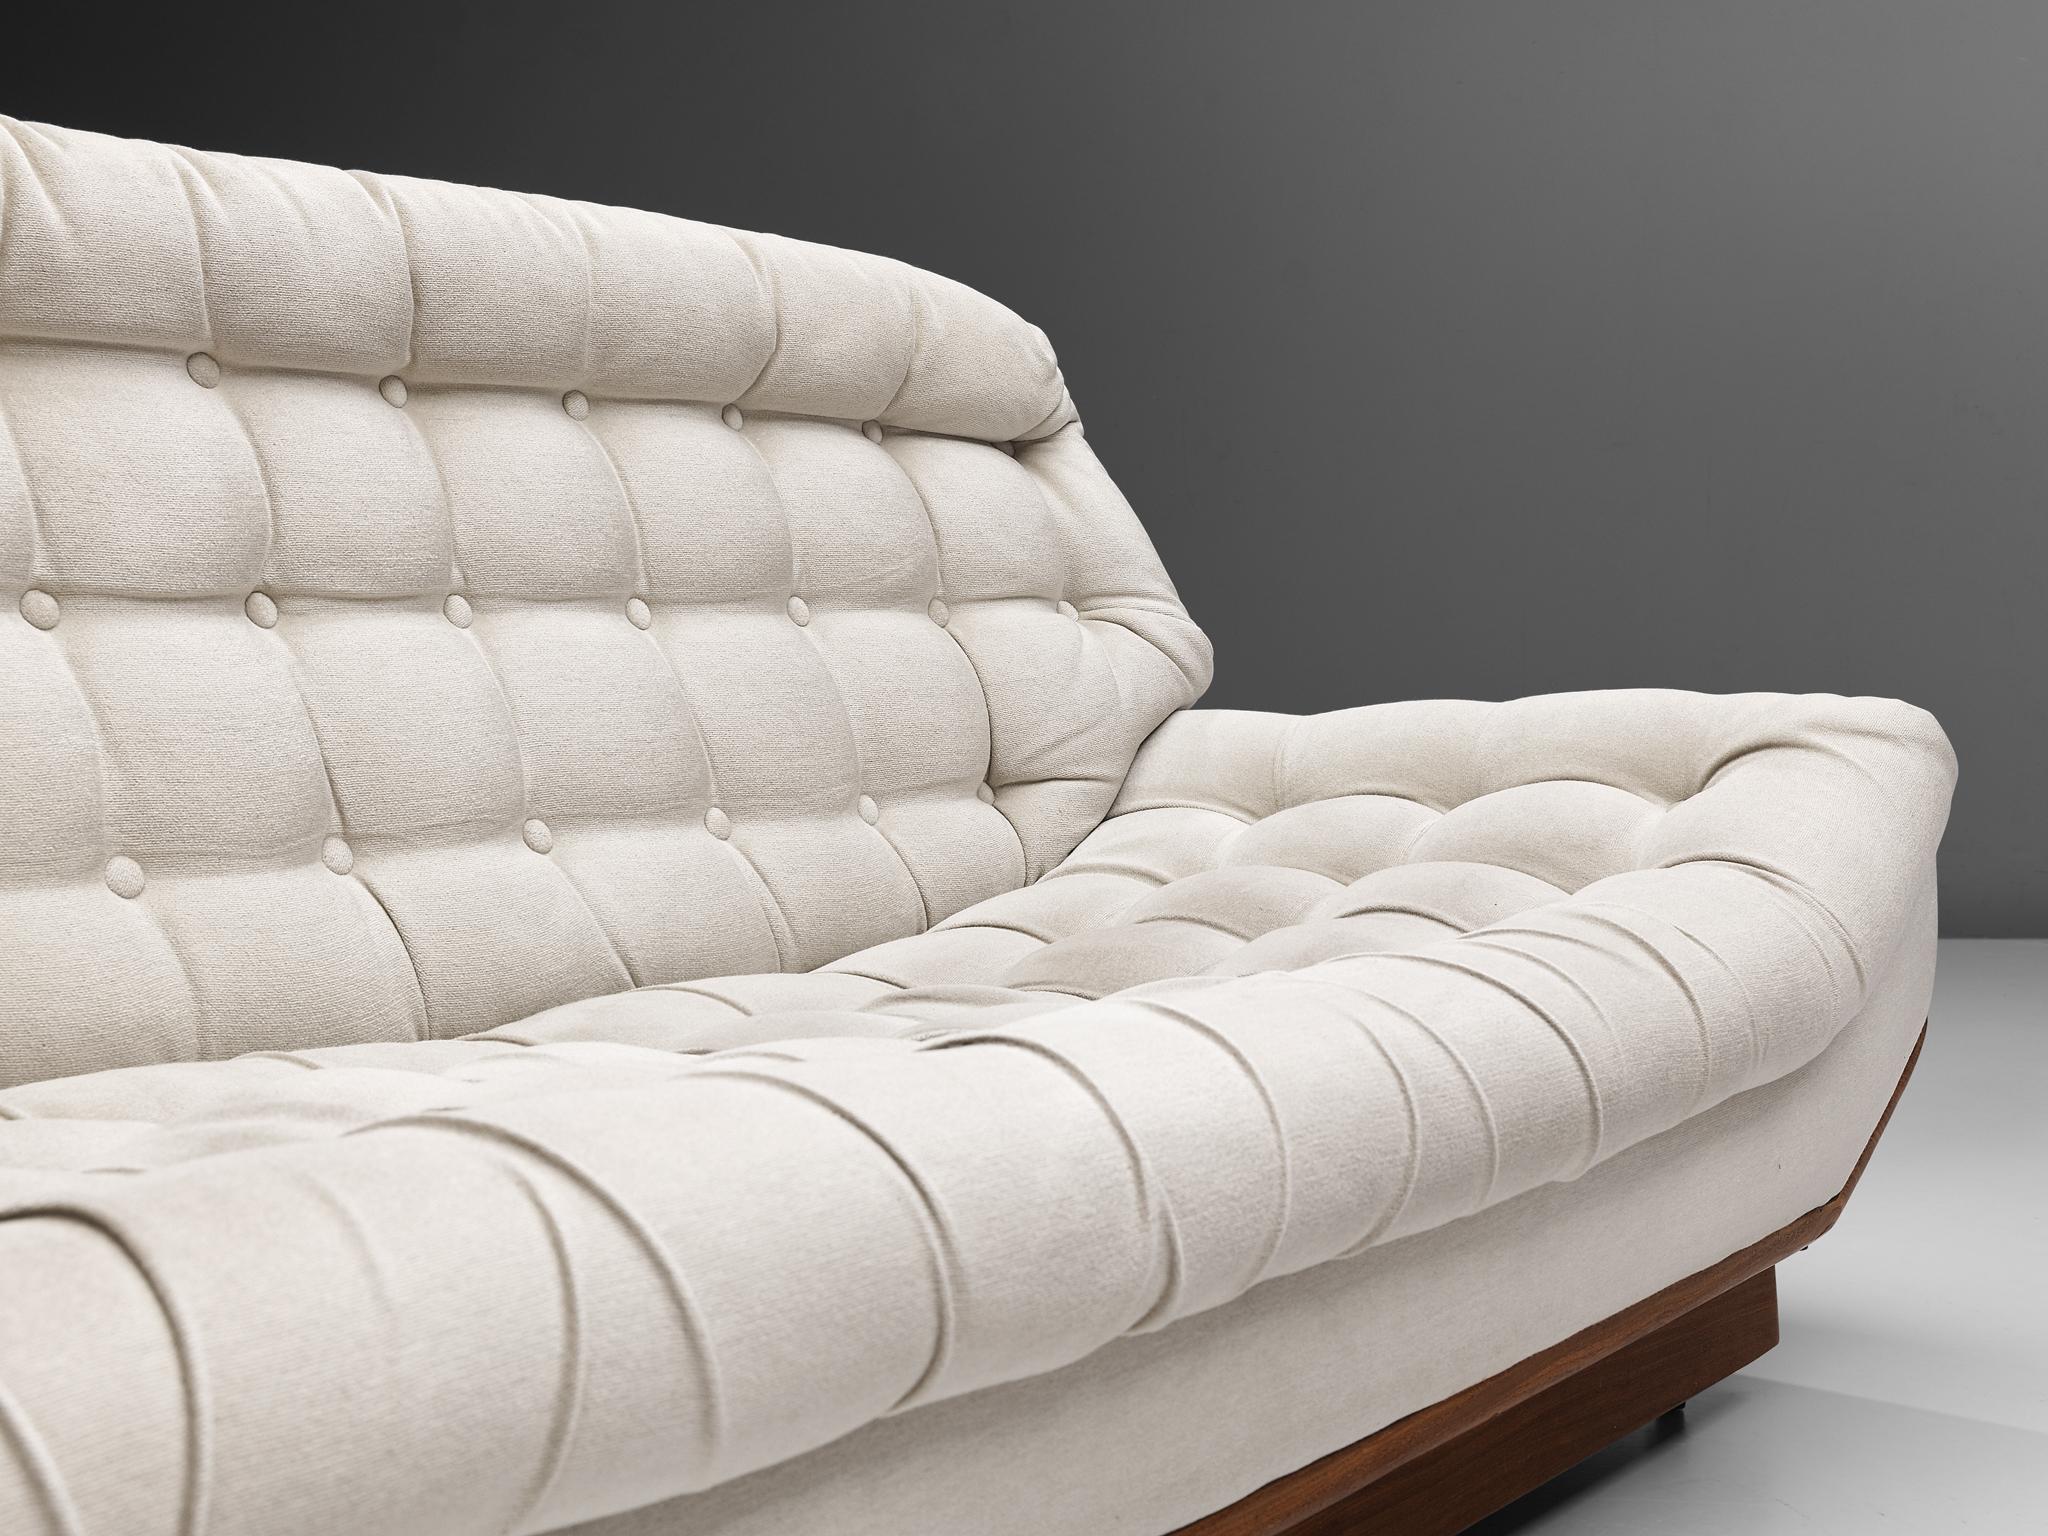 Italian Sofa with White Tufted Upholstery 2